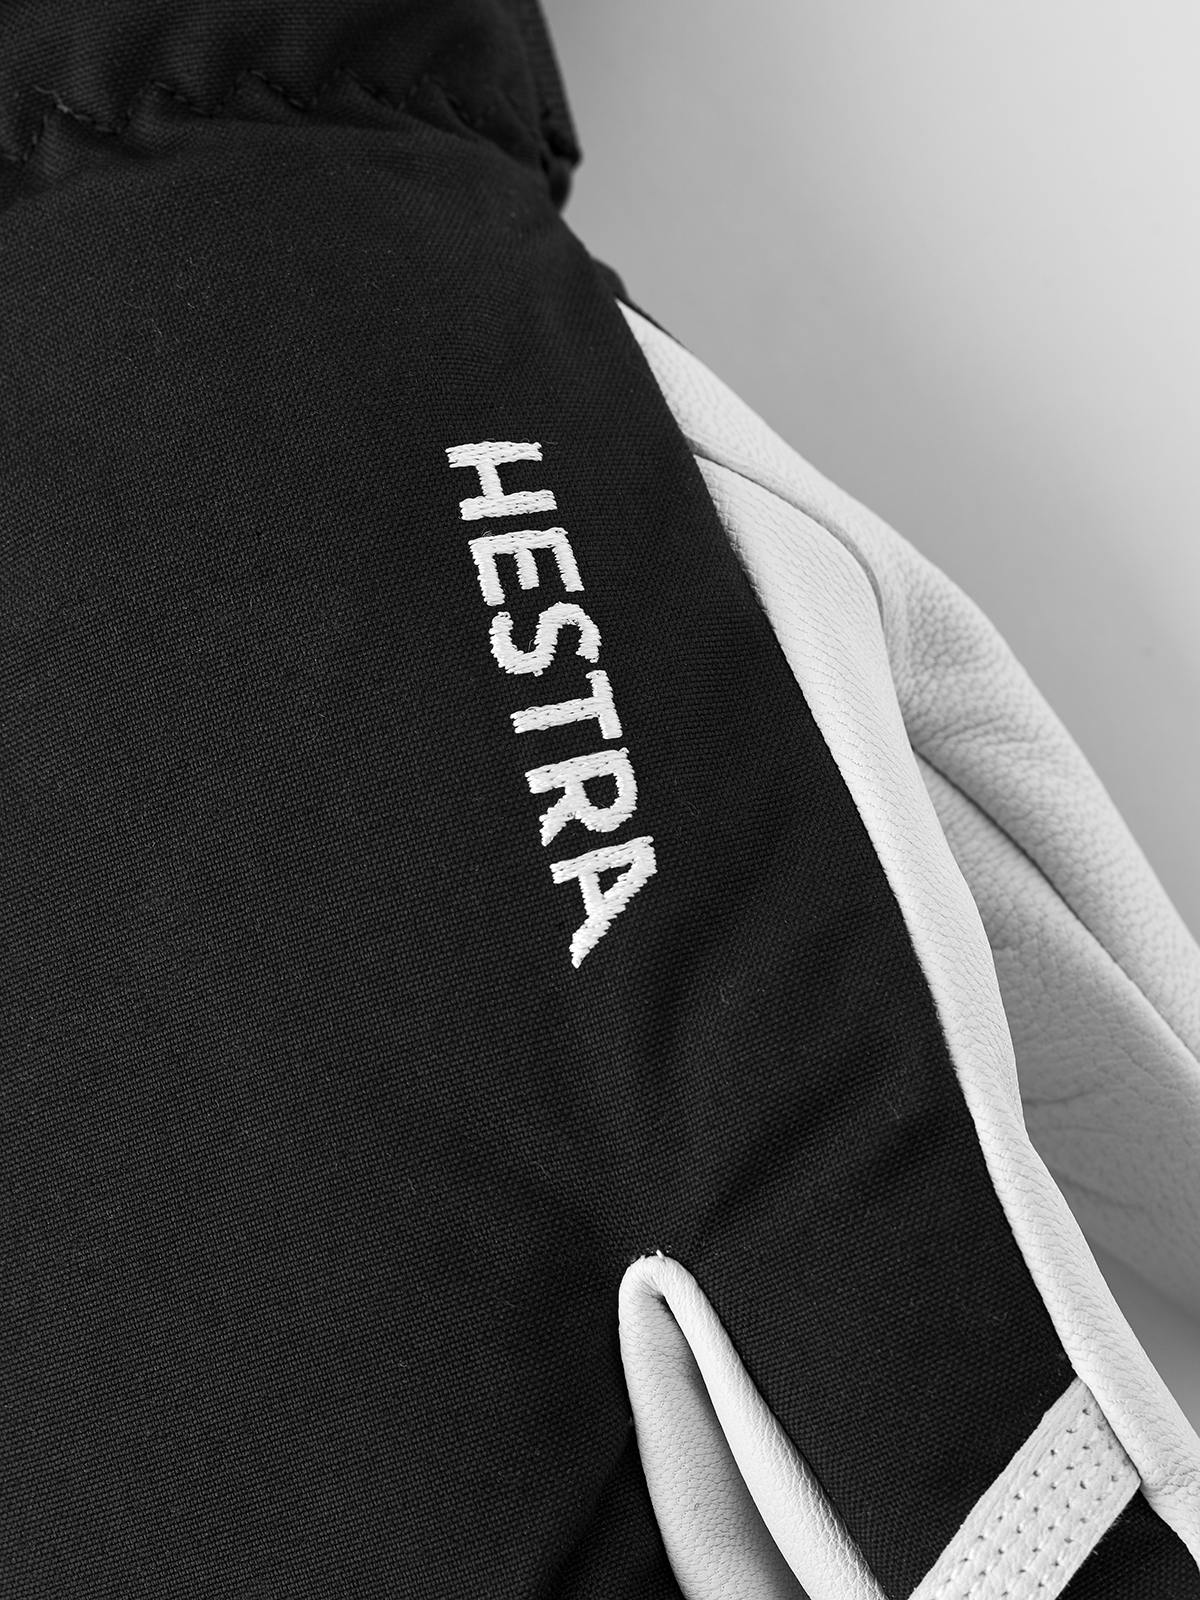 Hestra Men's Army Leather Heli Gloves